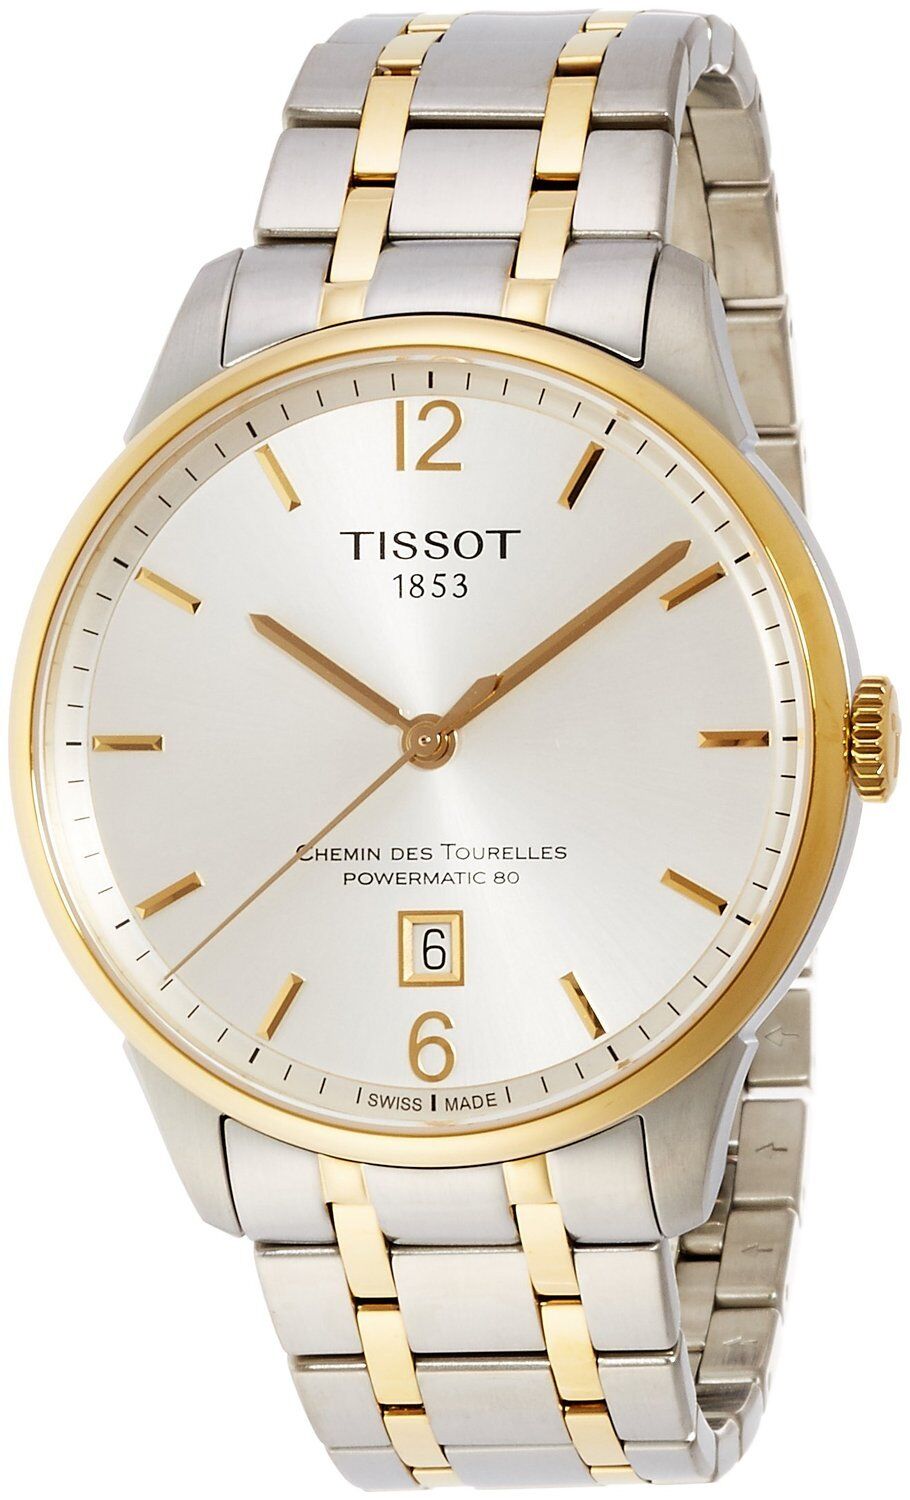 title:Tissot Men's T099.407.22.037.00 T-Classic 42mm Automatic Watch;color:Silver and Gold